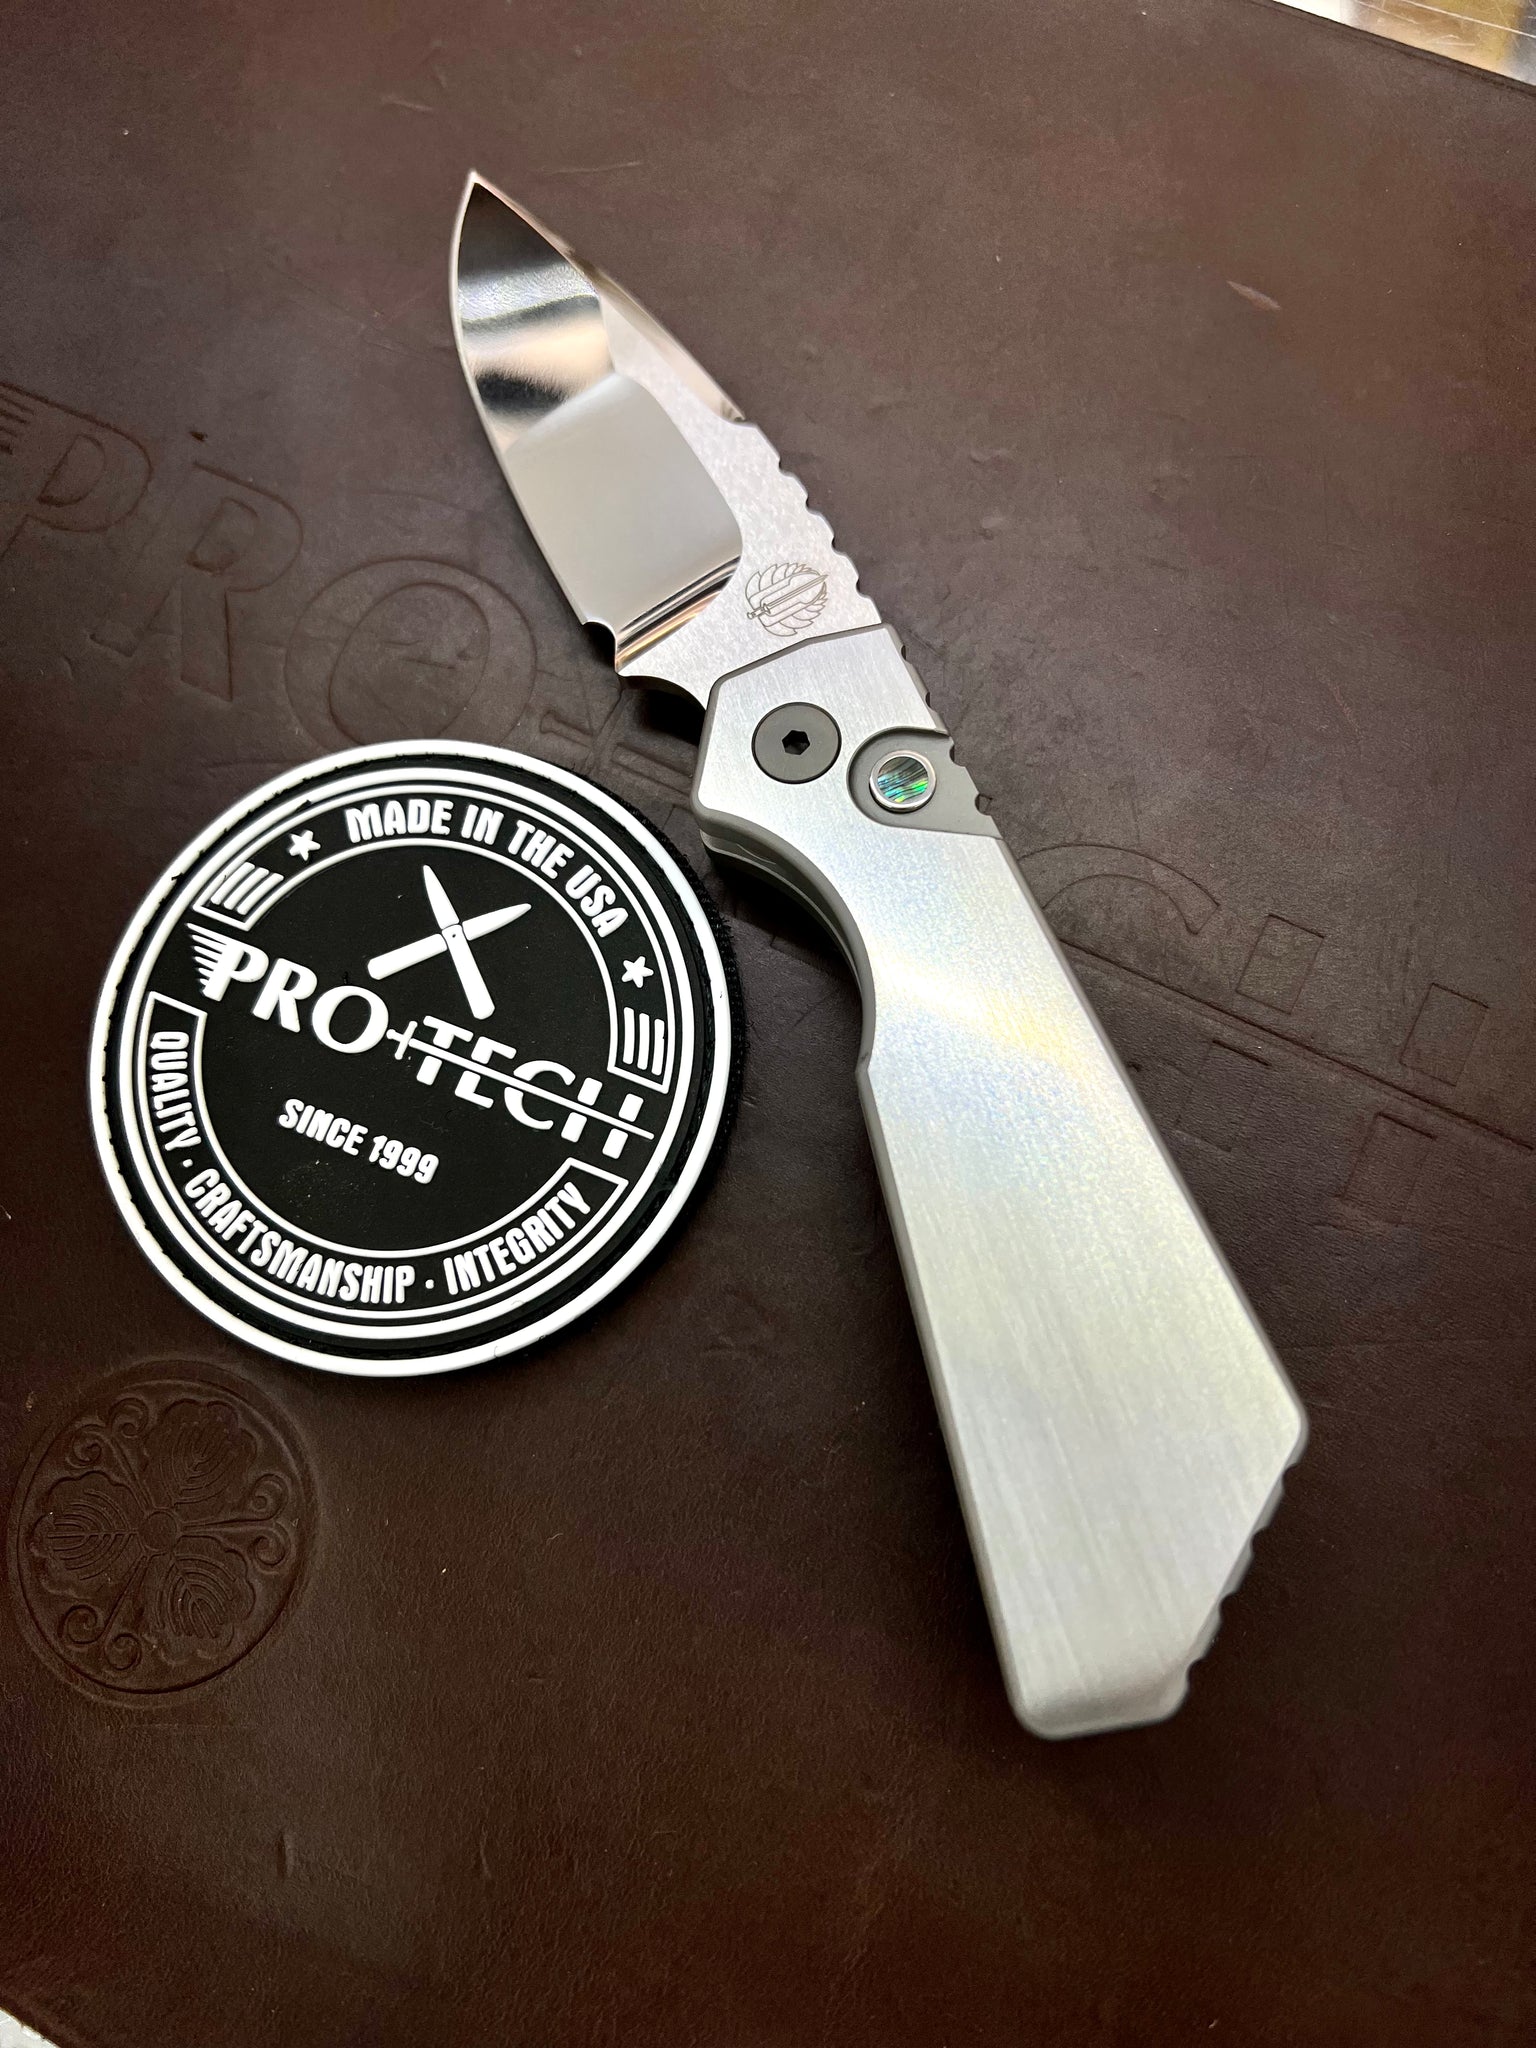 Pro-tech Strider PT+ Custom 005 Blade 2023 Polished Steel Mike Irie Mirrored Auto